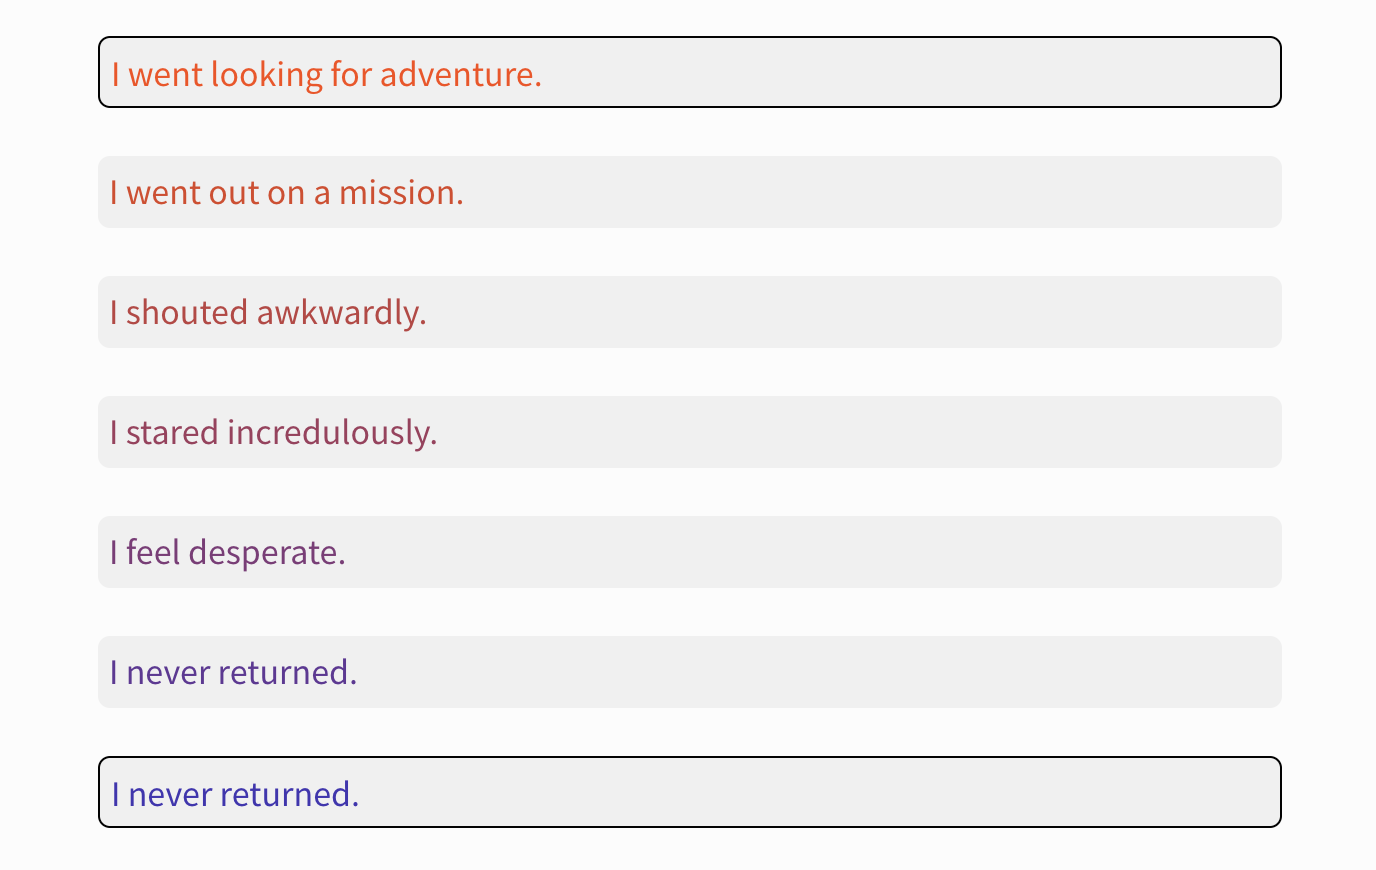 A screenshot of an example from “Voyages in Sentence Space.” It shows this example:“I went looking for adventure. I went out on a mission. I shouted awkwardly. I stared incredulously. I feel desperate. I never returned. I never returned.